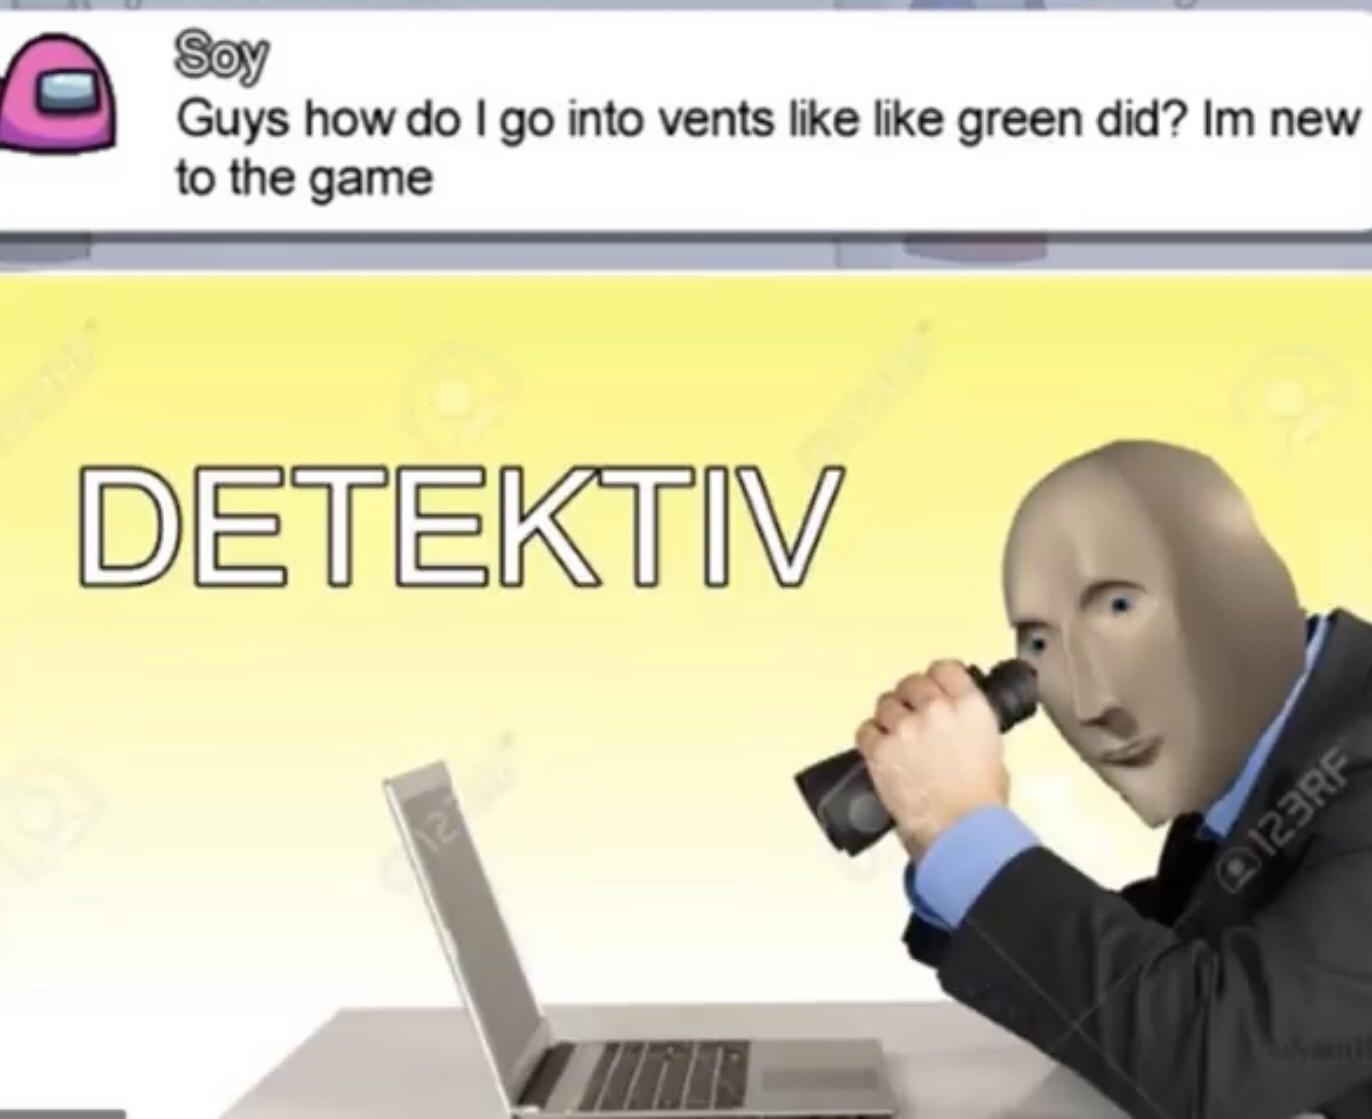 meme man detective template - @ I Soy Guys how do I go into vents green did? Im new to the game Detektiv 123RF